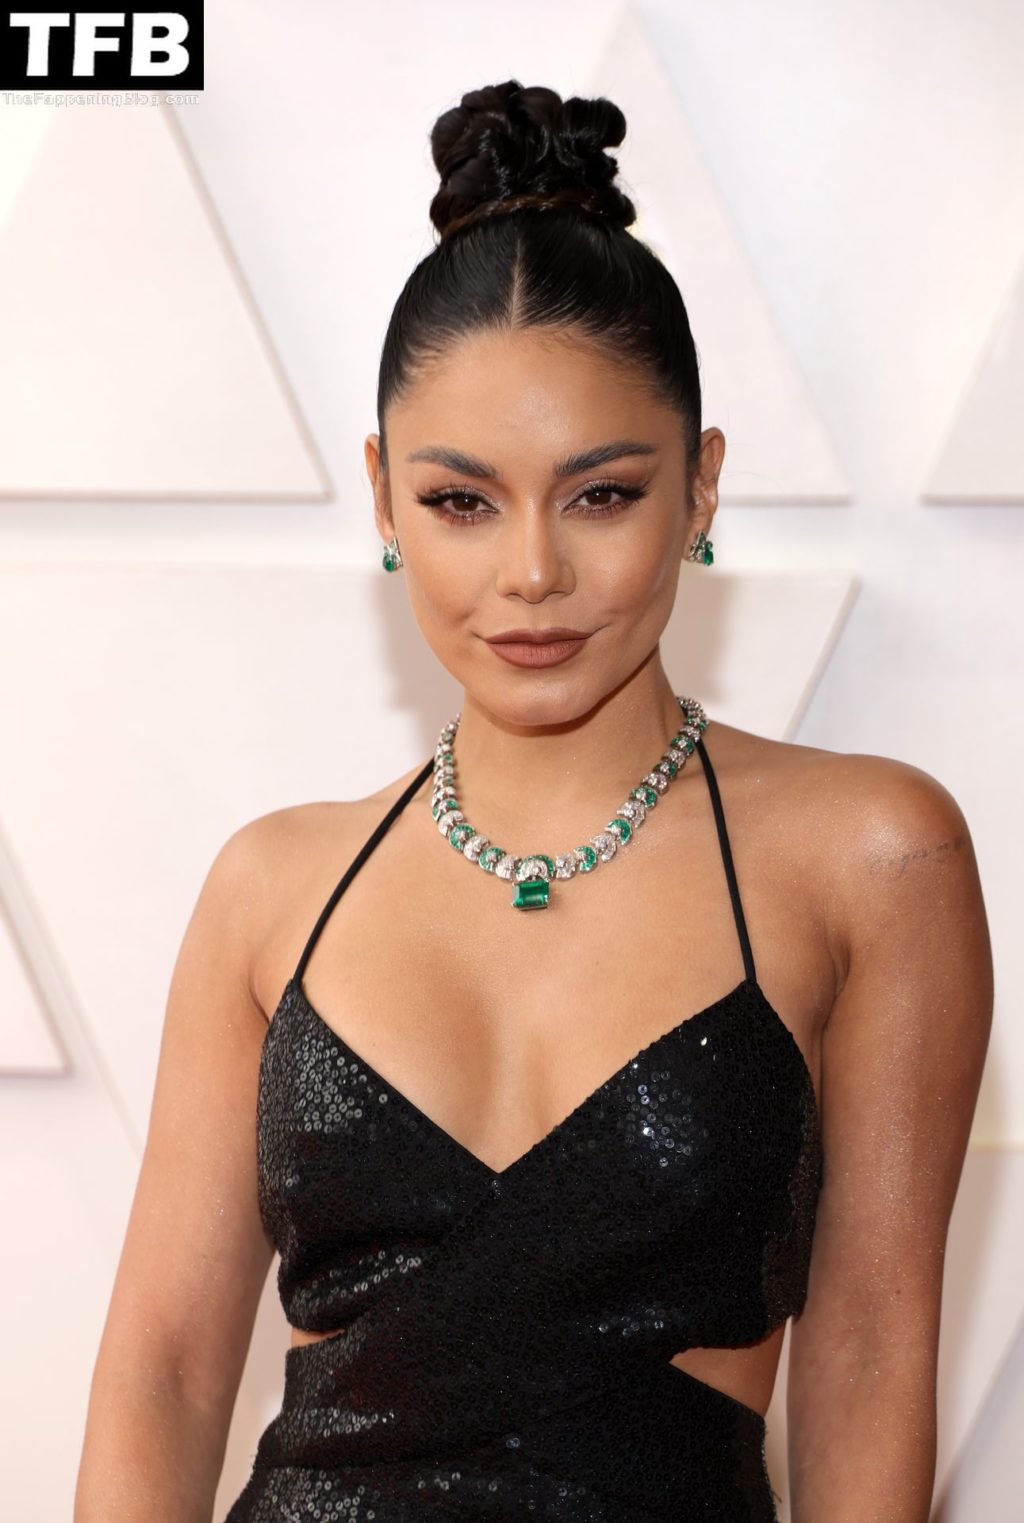 Vanessa Hudgens Sexy The Fappening Blog 21 4 1024x1523 - Vanessa Hudgens Poses on the Red Carpet at the 94th Annual Academy Awards (83 Photos)